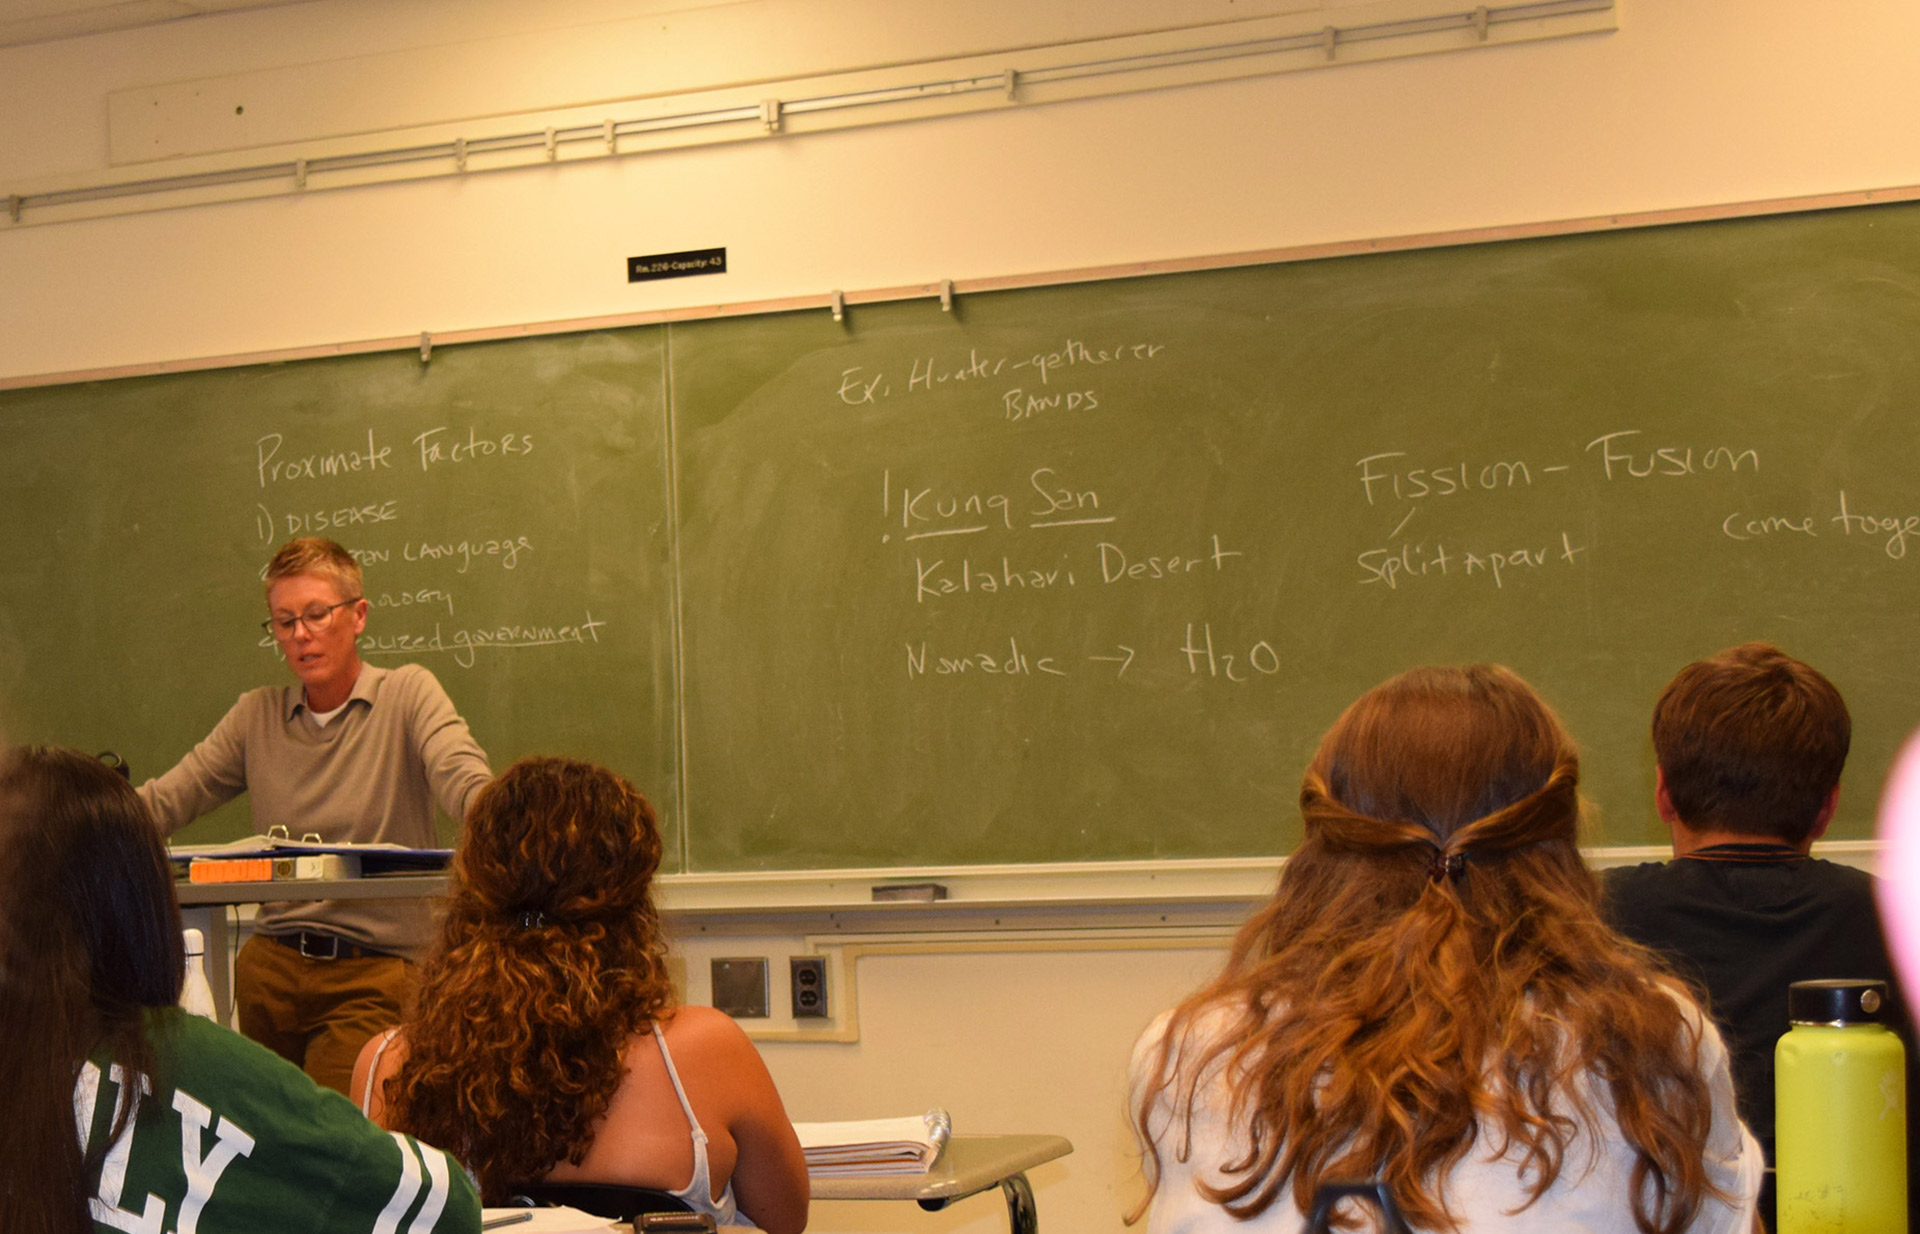 Elsewhere in the academic world of Cal Poly, LGBTQ+ people are represented in the faculty. Here, Dr. Jennifer Lewis, who identifies herself as a homosexual, teaches her Human Cultural Adaptations class on October 15, 2018. Lewis has a doctorate in Anthropology from New York University and received the Outstanding Career Achievement in Teaching by a Lecturer from the College of Liberal Arts in 2014. On the first day of classes each quarter, she introduces herself and her orientation bluntly to her students, and advocates: “Whatever makes you happy in life, do it.” Photo Credit: Katelyn Biddle